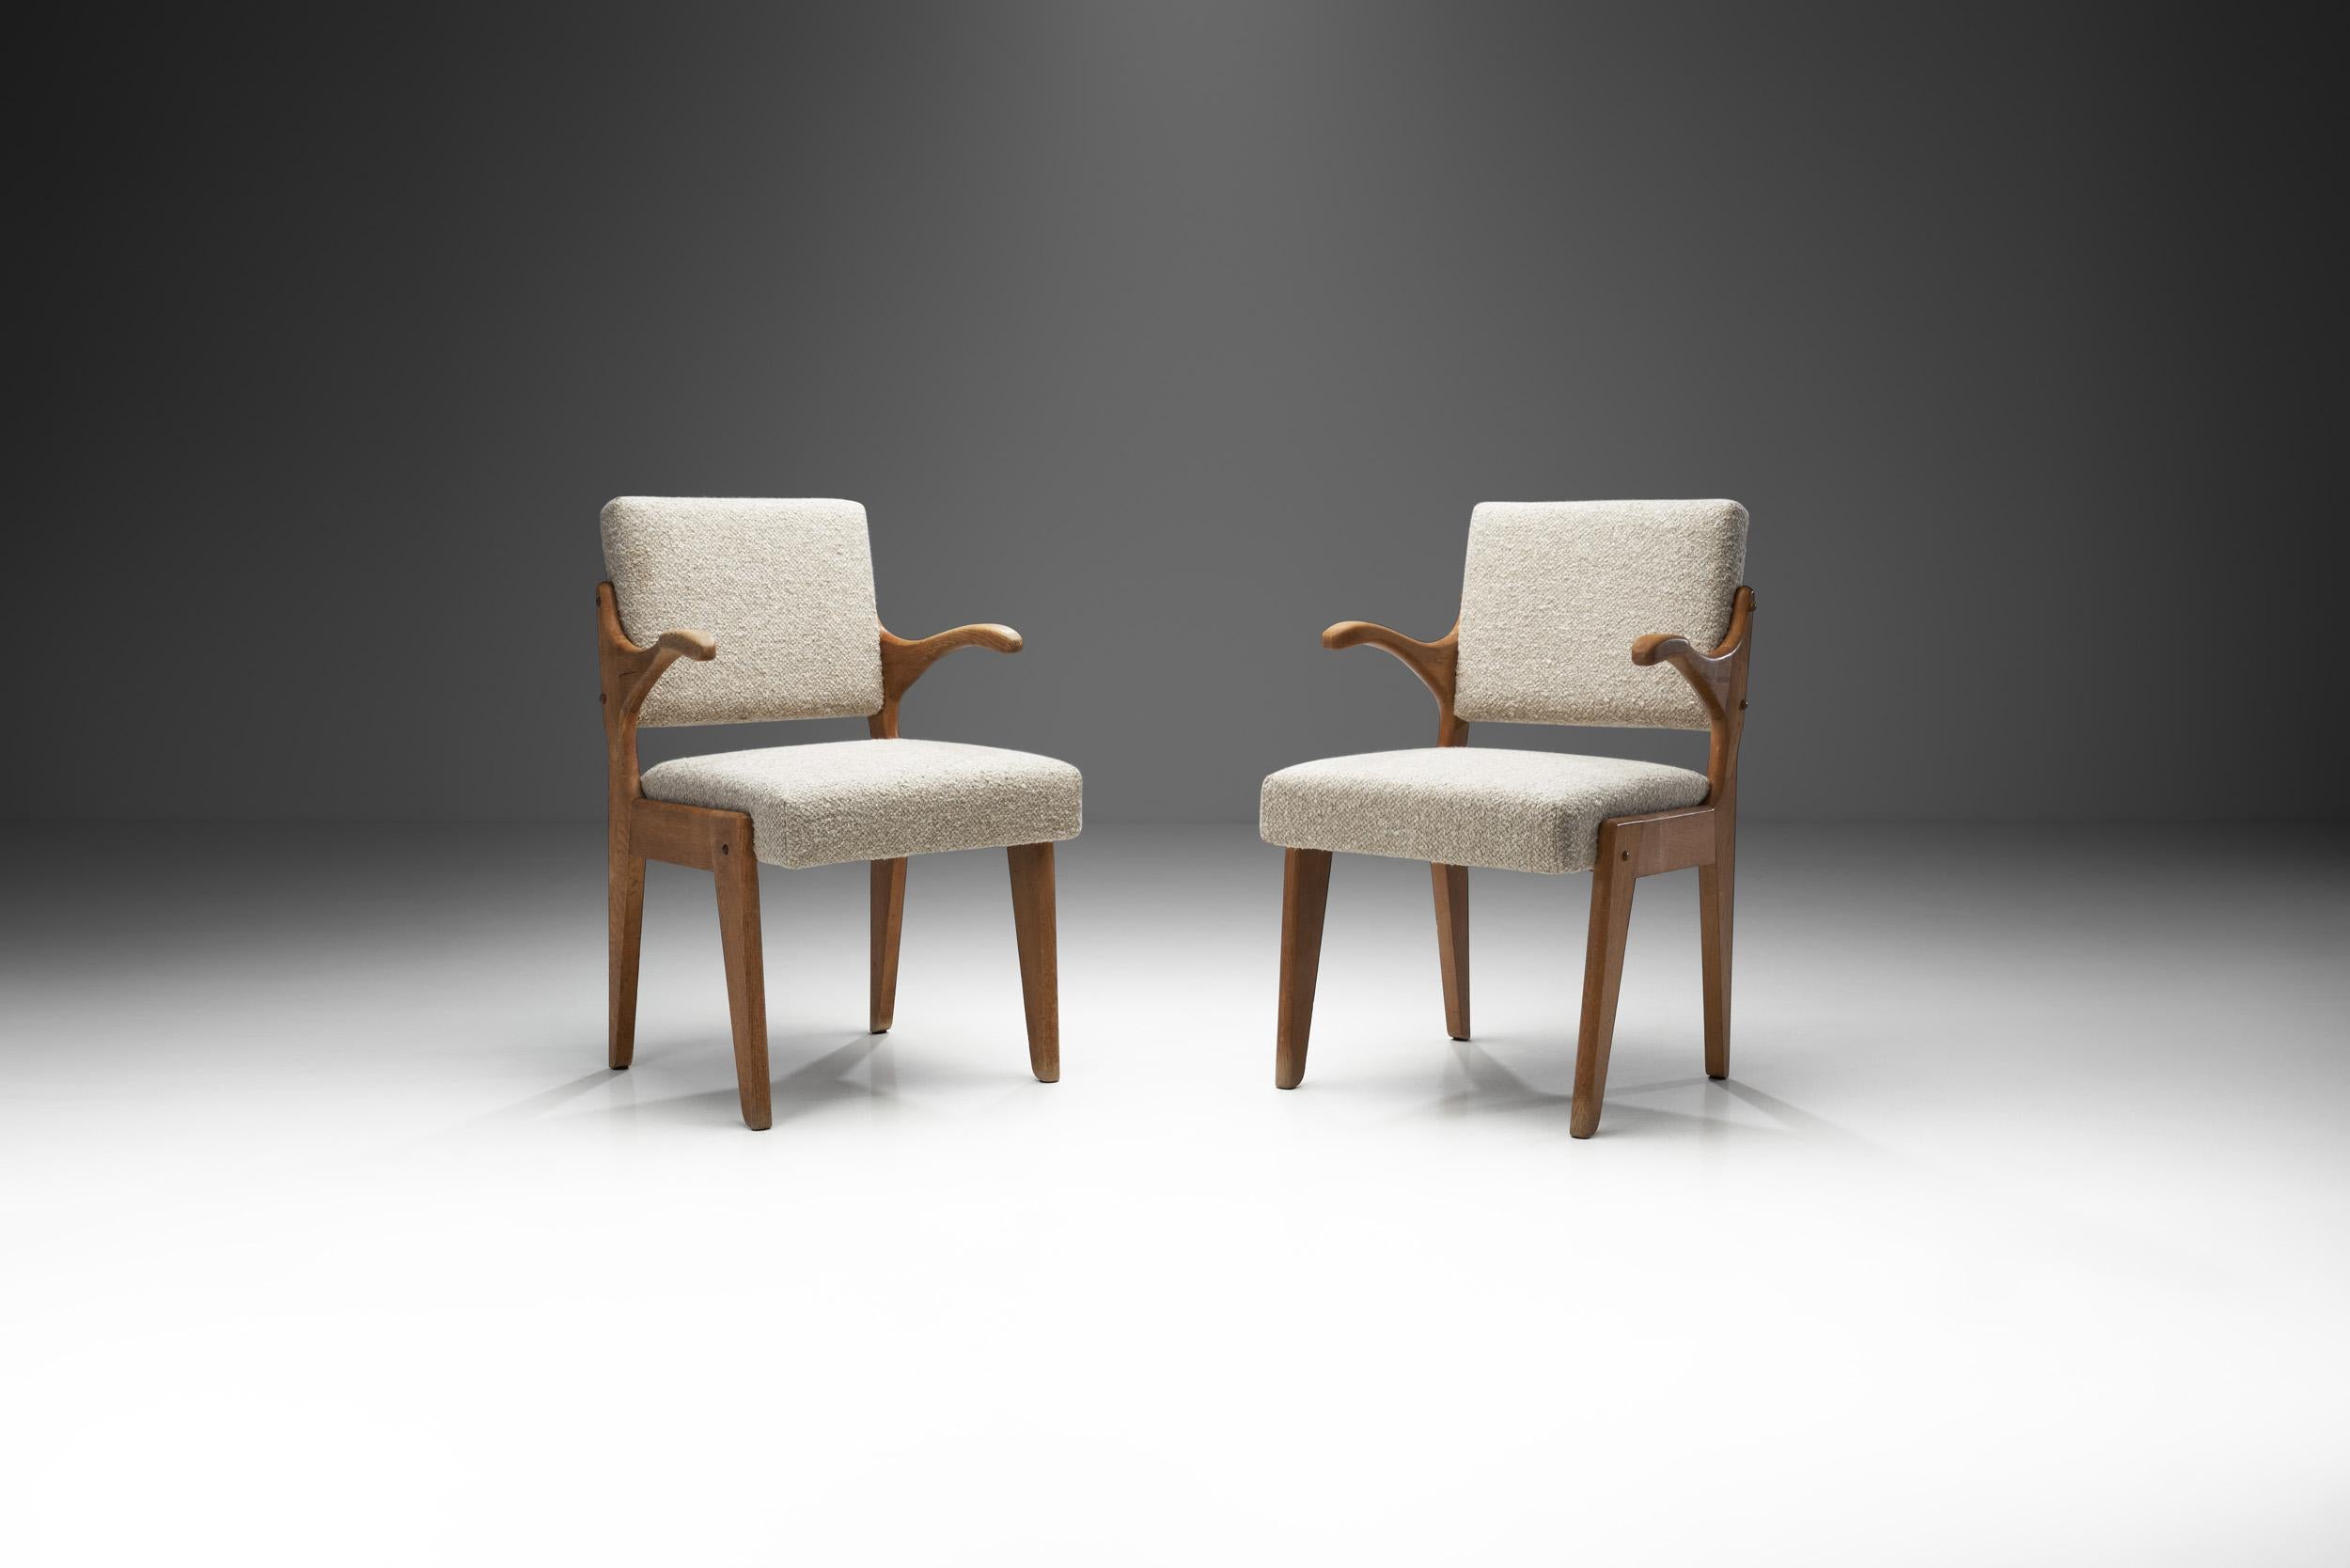 This rare pair of armchairs is among the rarest chair models of the French designers. “Fauteuil bridge” or bridge chairs from France are generally lightweight chairs, often part of a set of matching chairs and bridge table. Bridge chairs were